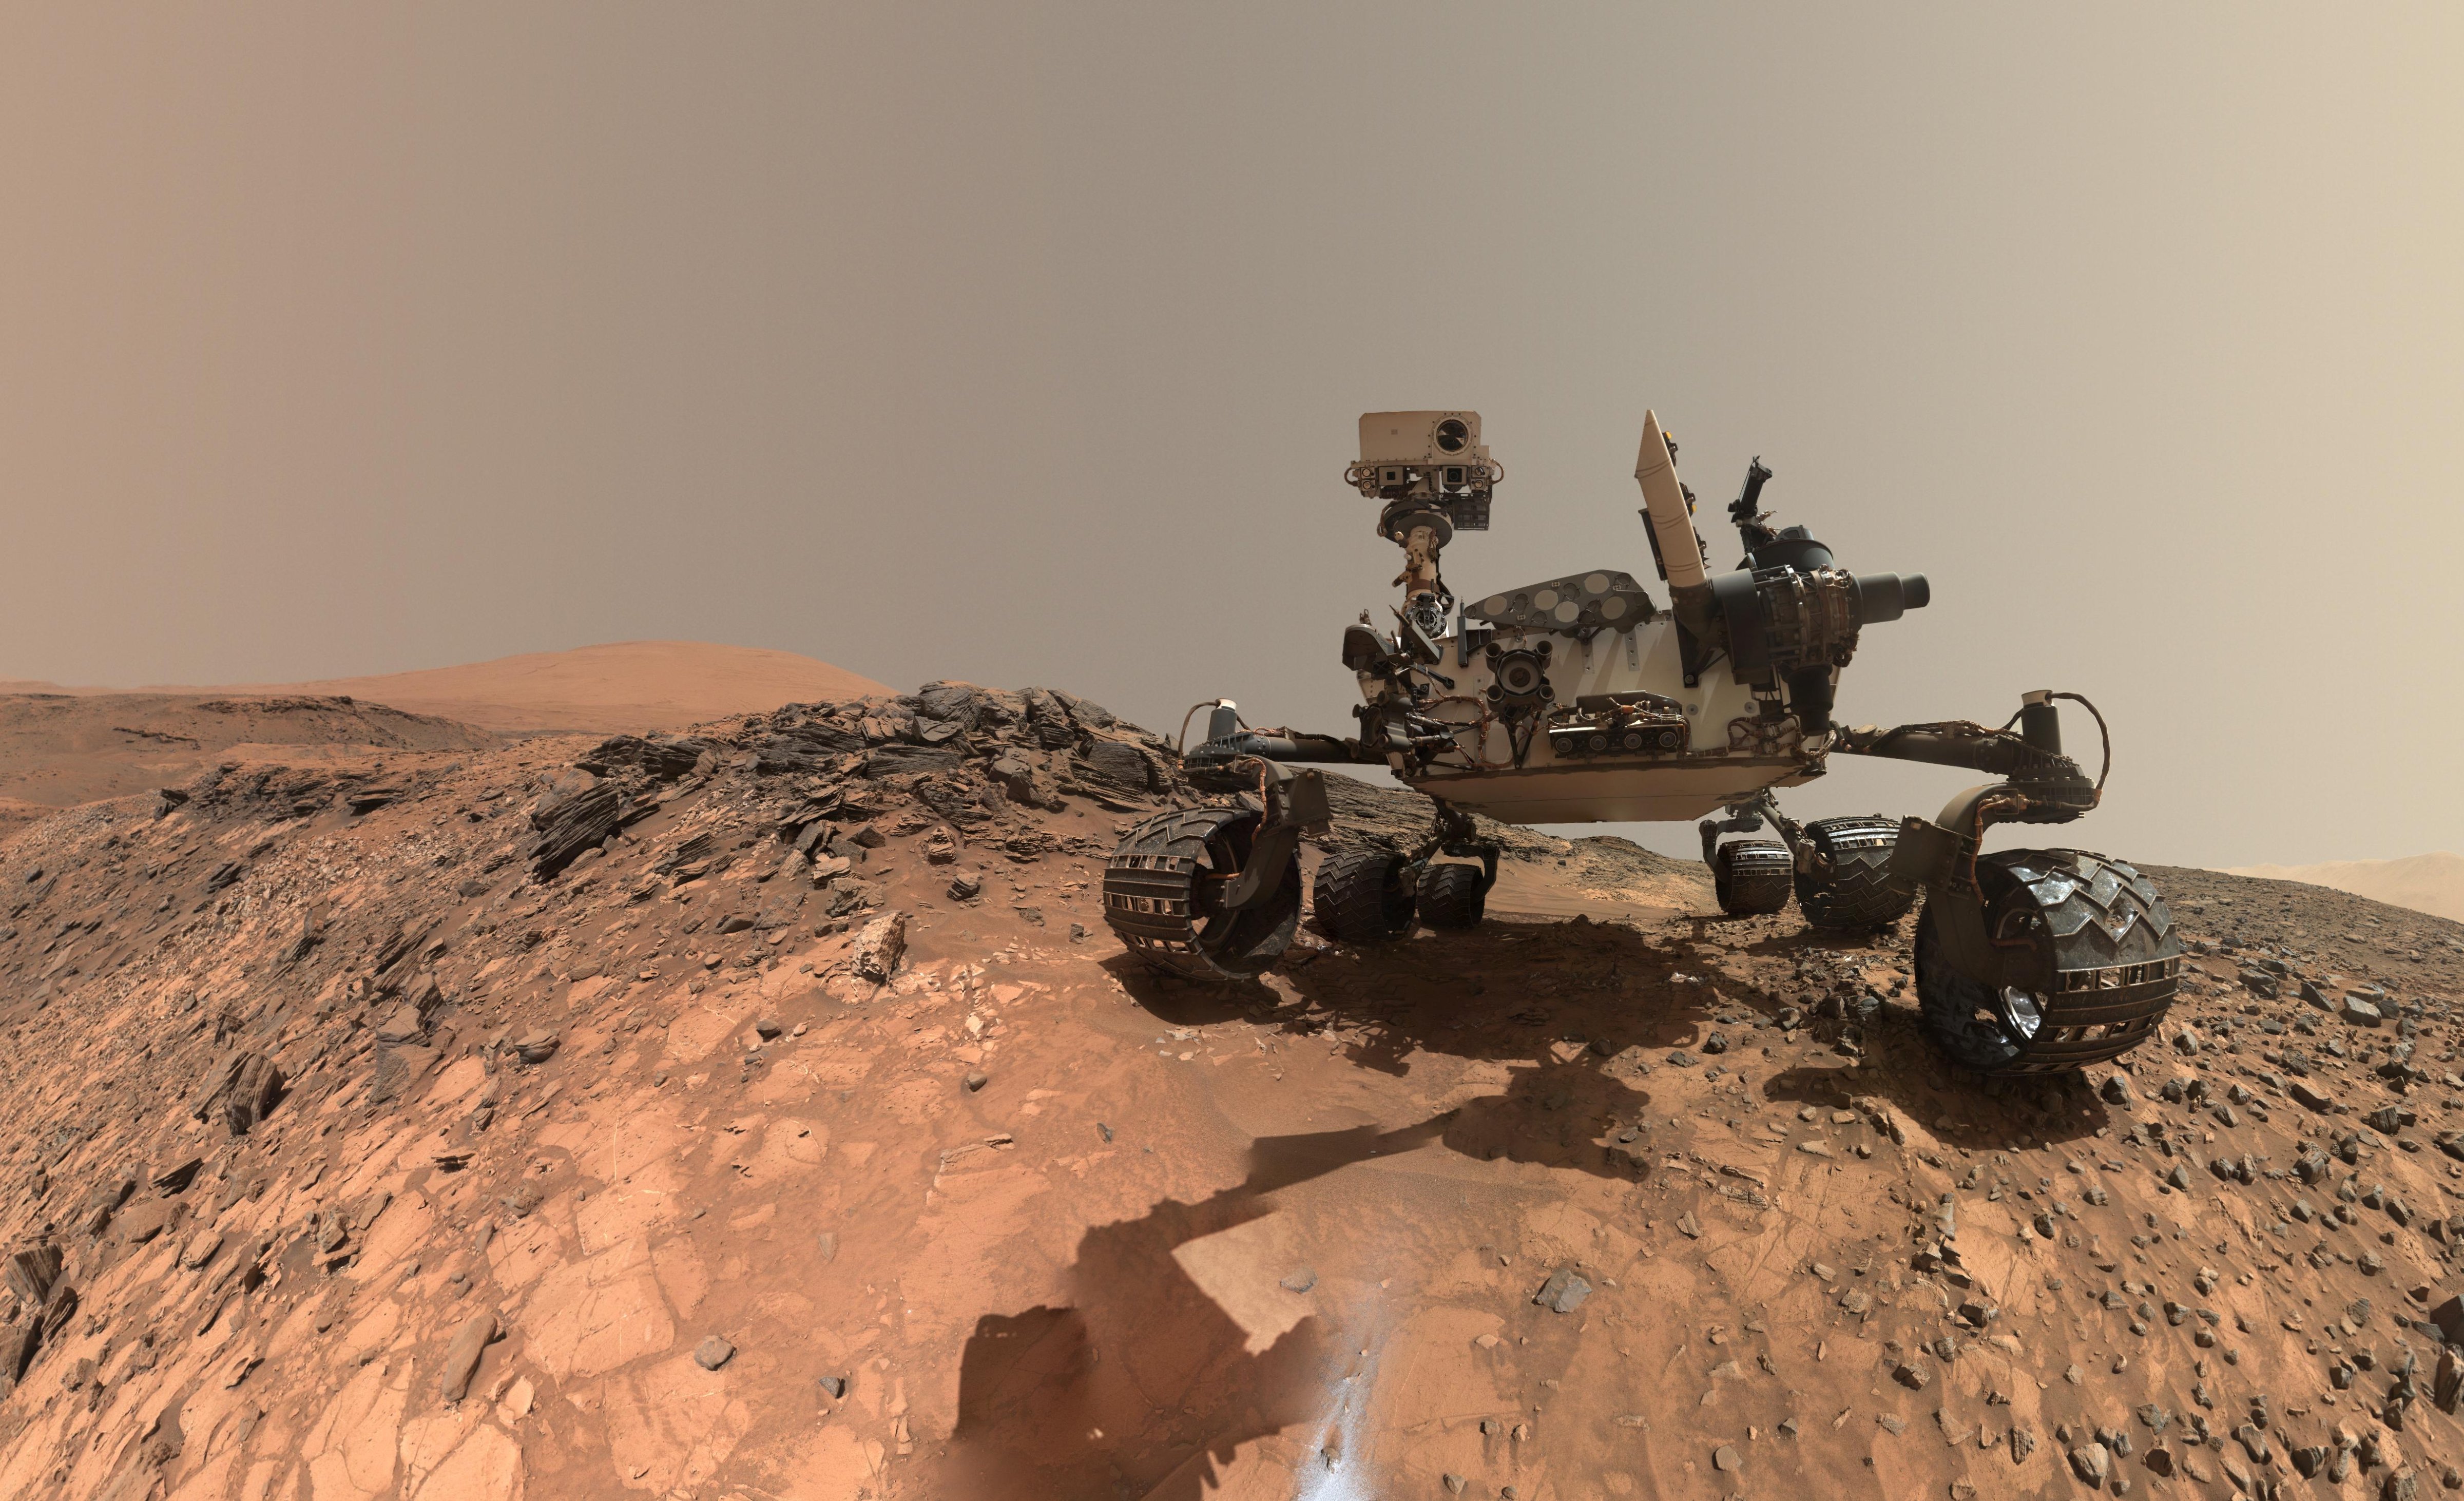 This low-angle self-portrait of NASA's Curiosity Mars rover shows the vehicle at the site from which it reached down to drill into a rock target. (JPL/NASA)